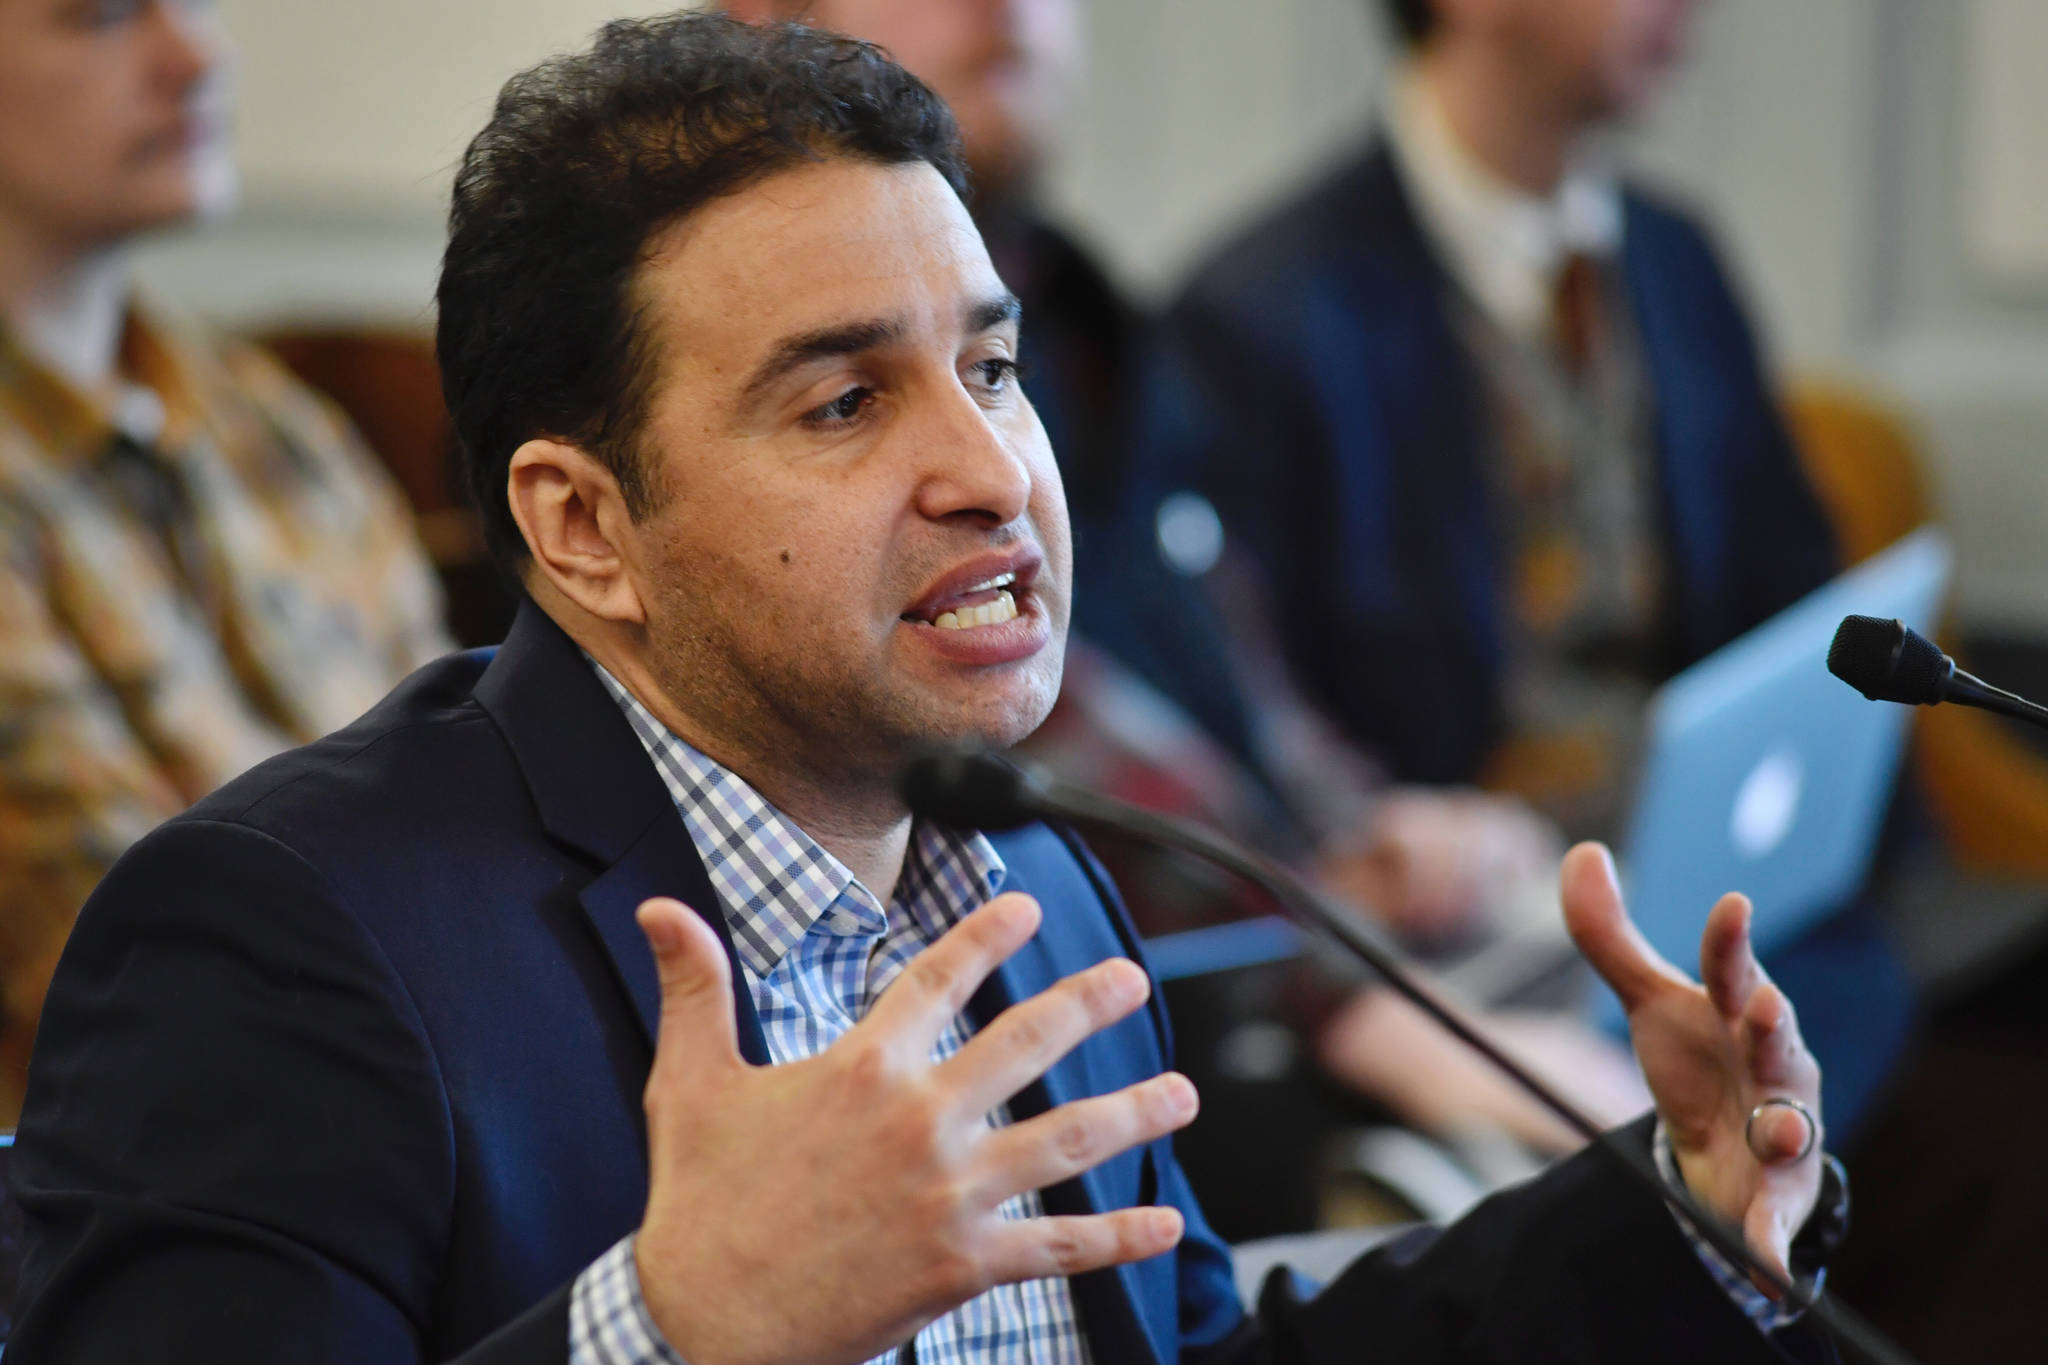 Mouhcine Guettabi, Associate Professor of Economics at the Institute of Social and Economic Research at the University of Alaska Anchorage, speaks to the Senate Finance Committee at the Capitol on Thursday, March 7, 2019. (Michael Penn | Juneau Empire)